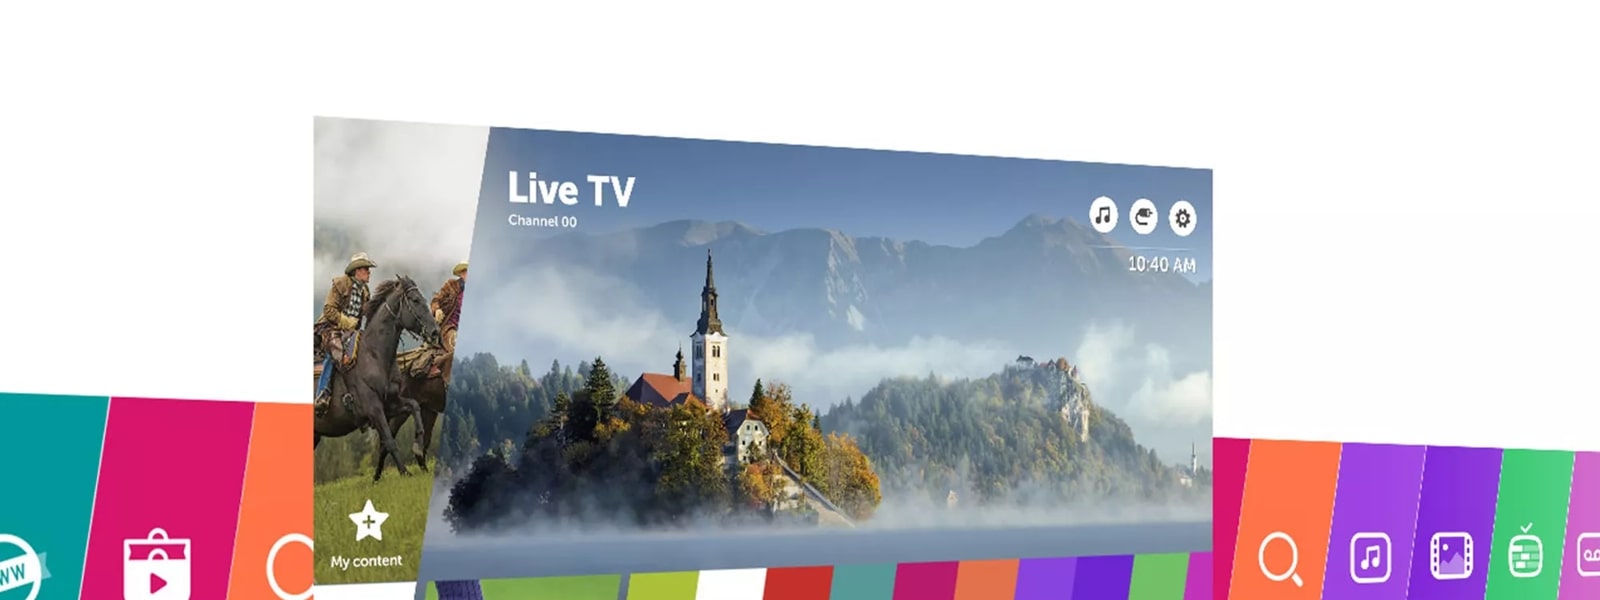 LG 24 HD Smart TV: Enhanced Viewing with webOS 3.5 - 24LM530S-PU